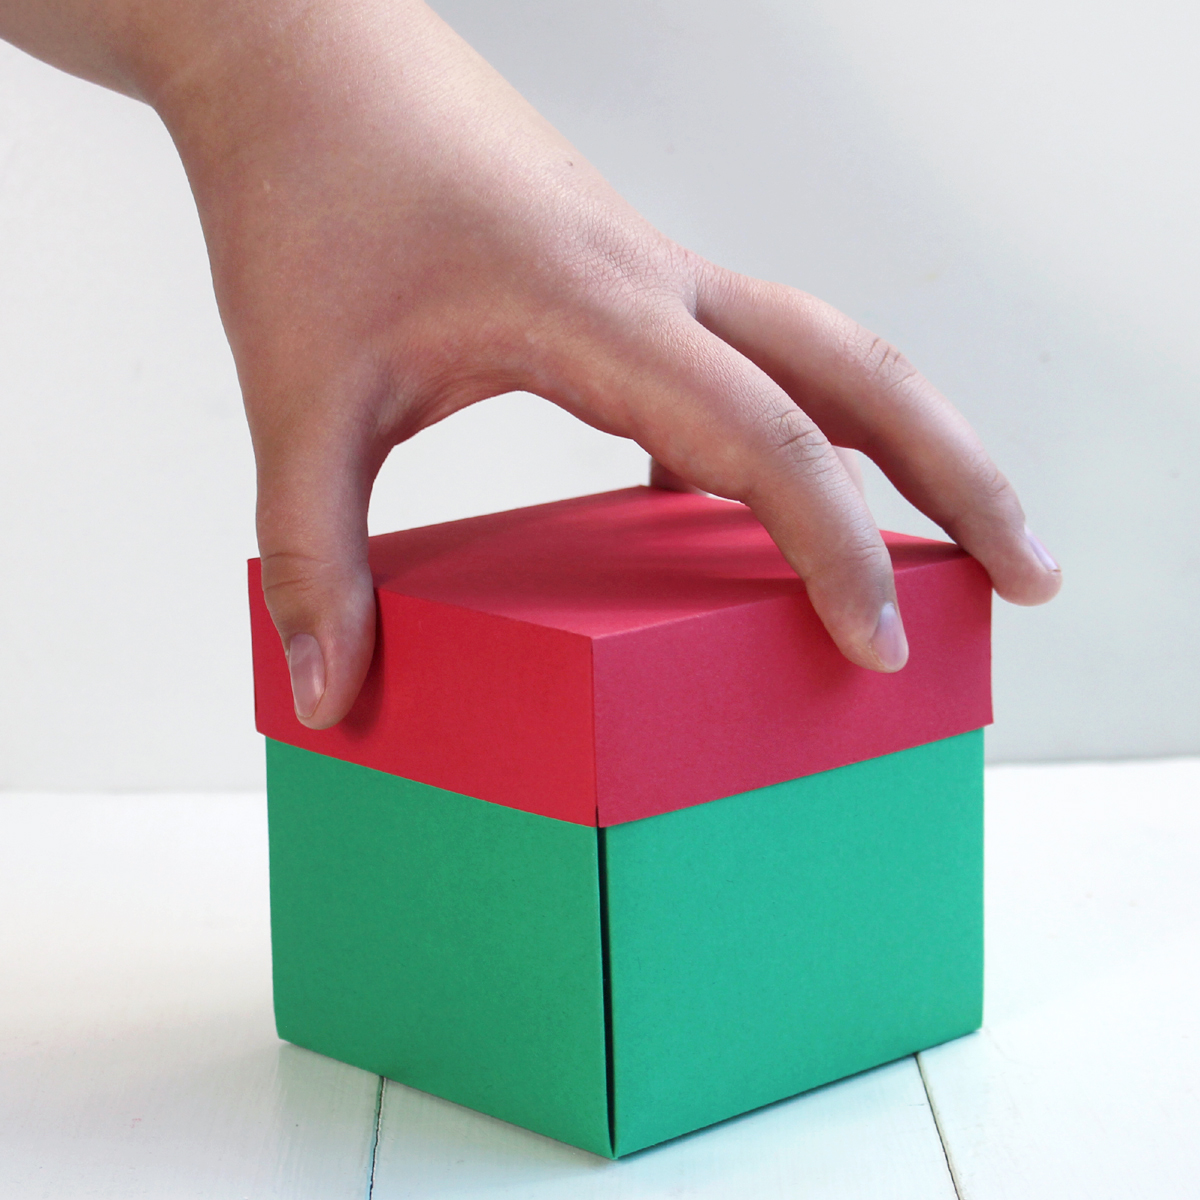 How to Make an Explosion Gift Box - Natalie Shaw